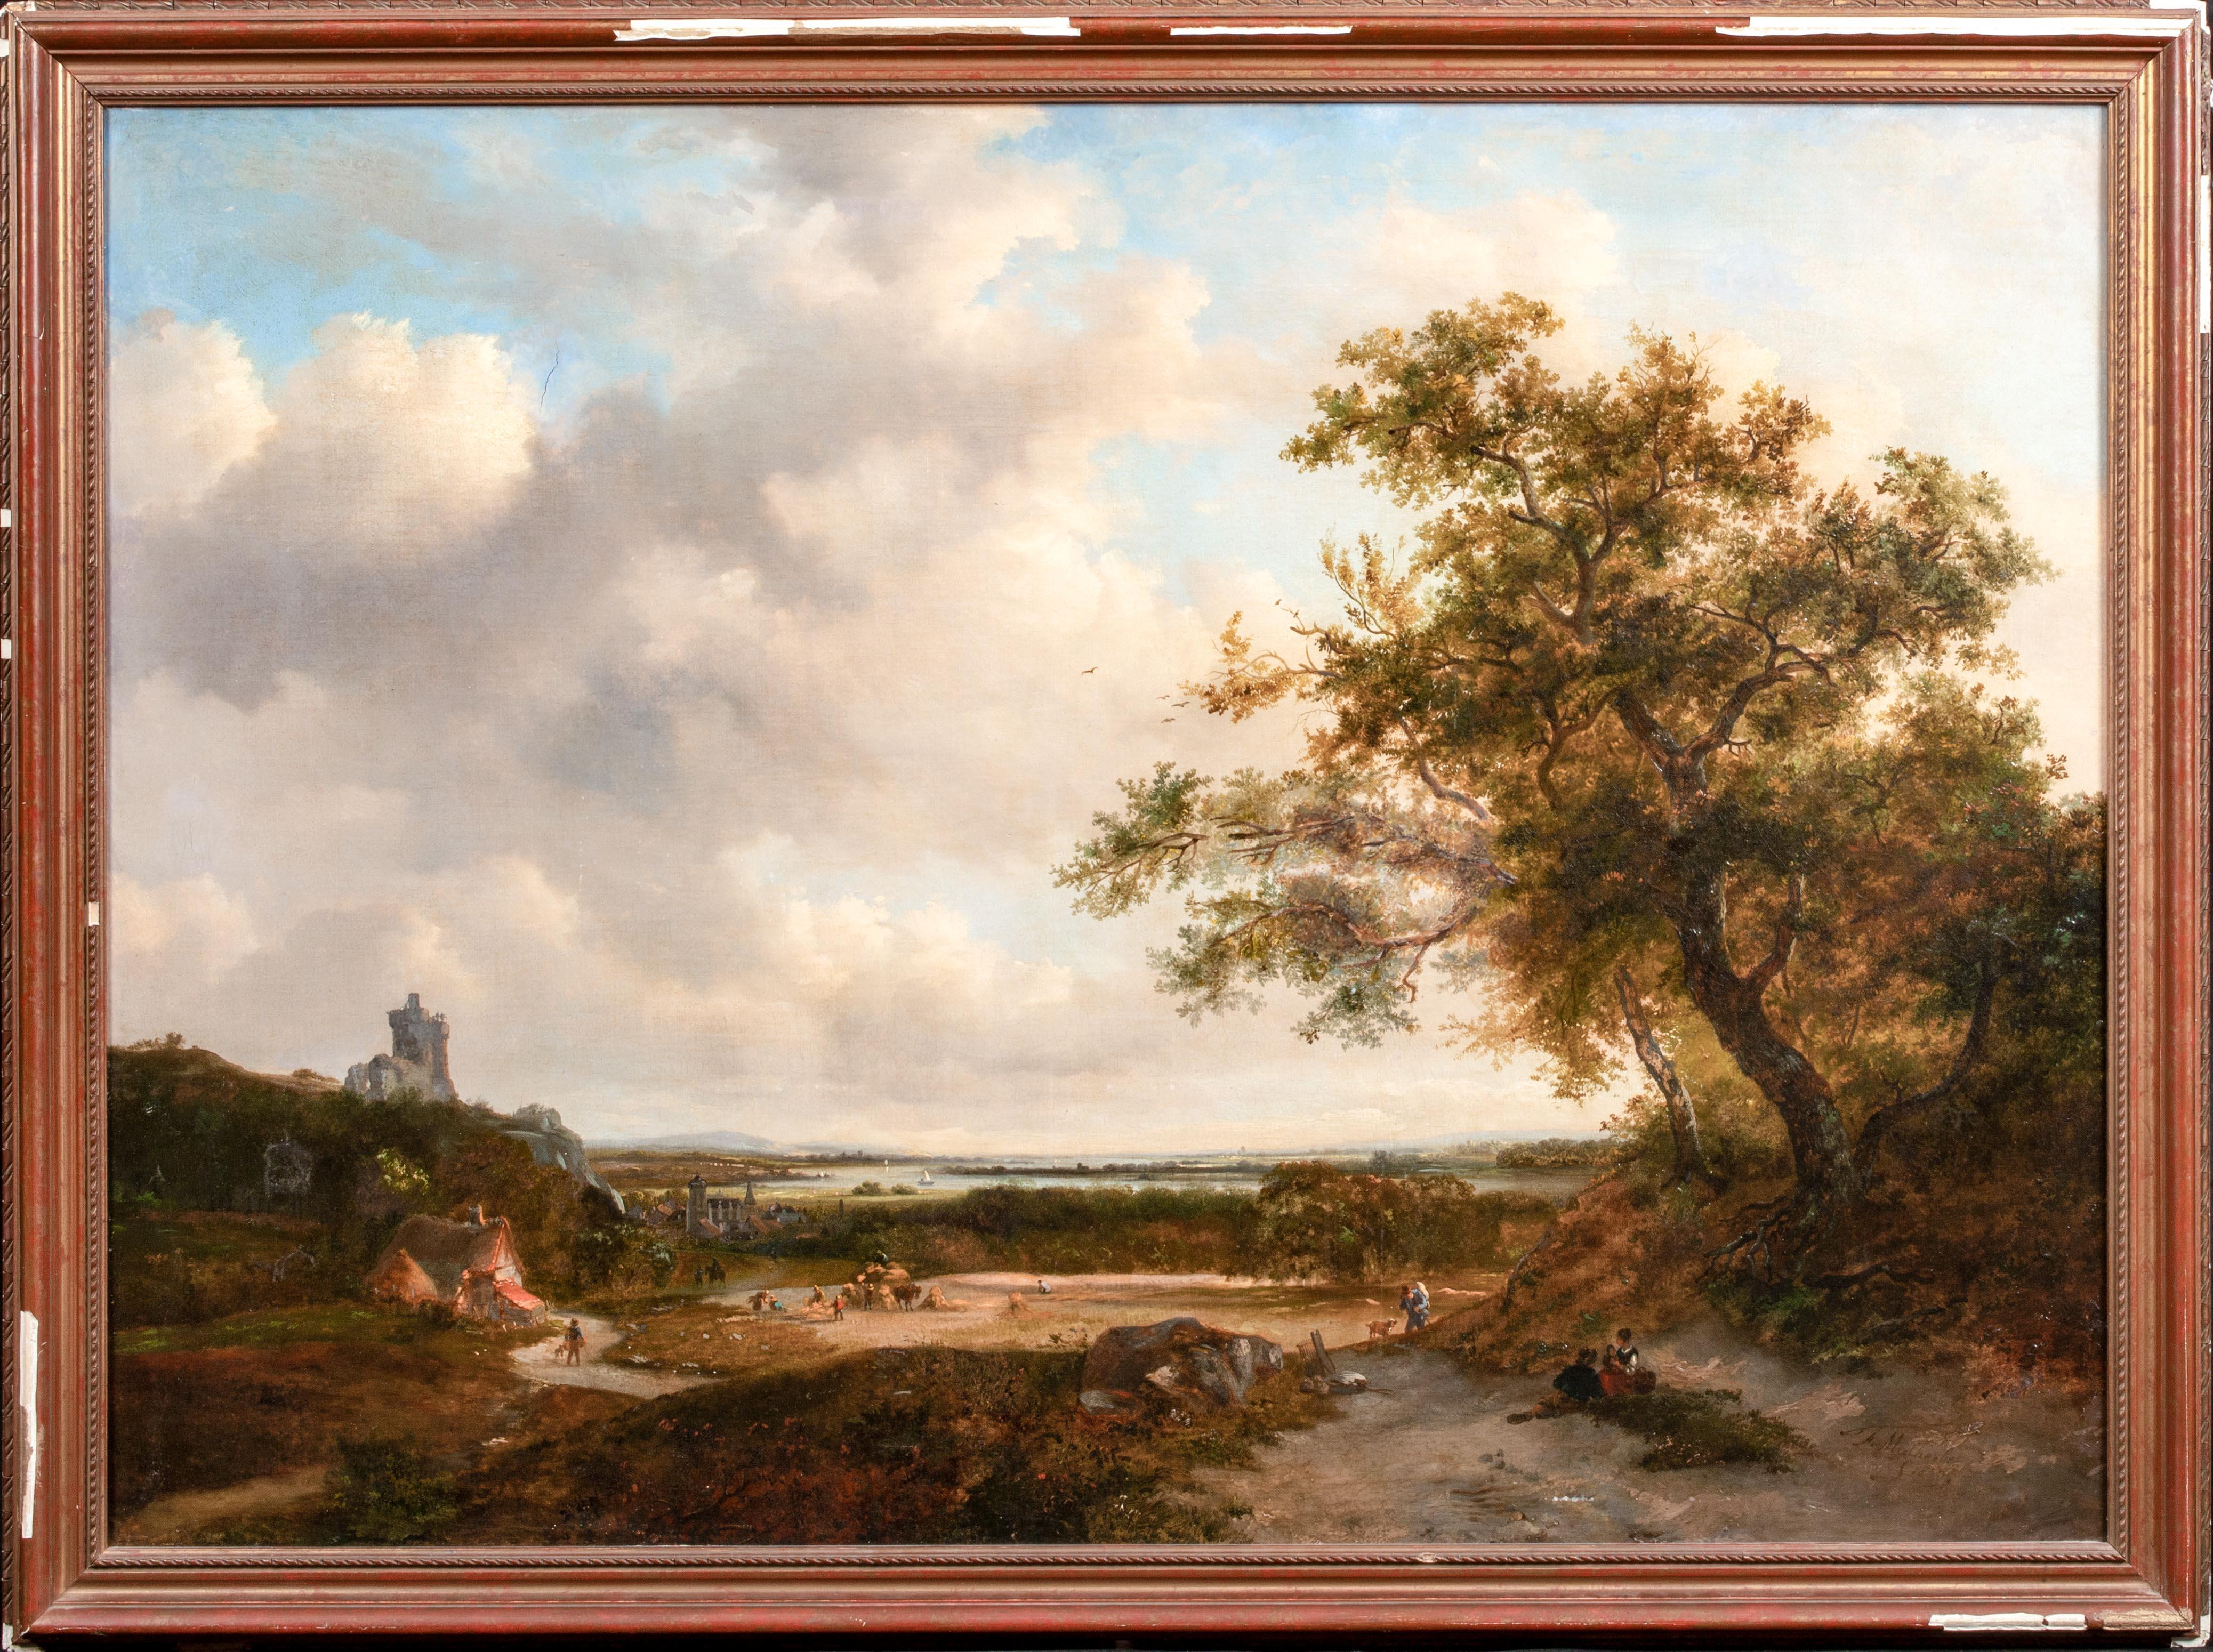 Figures In A Landscape, River Rhine In The Distance, dated 1869 Adolphe Malherbe - Painting by Unknown